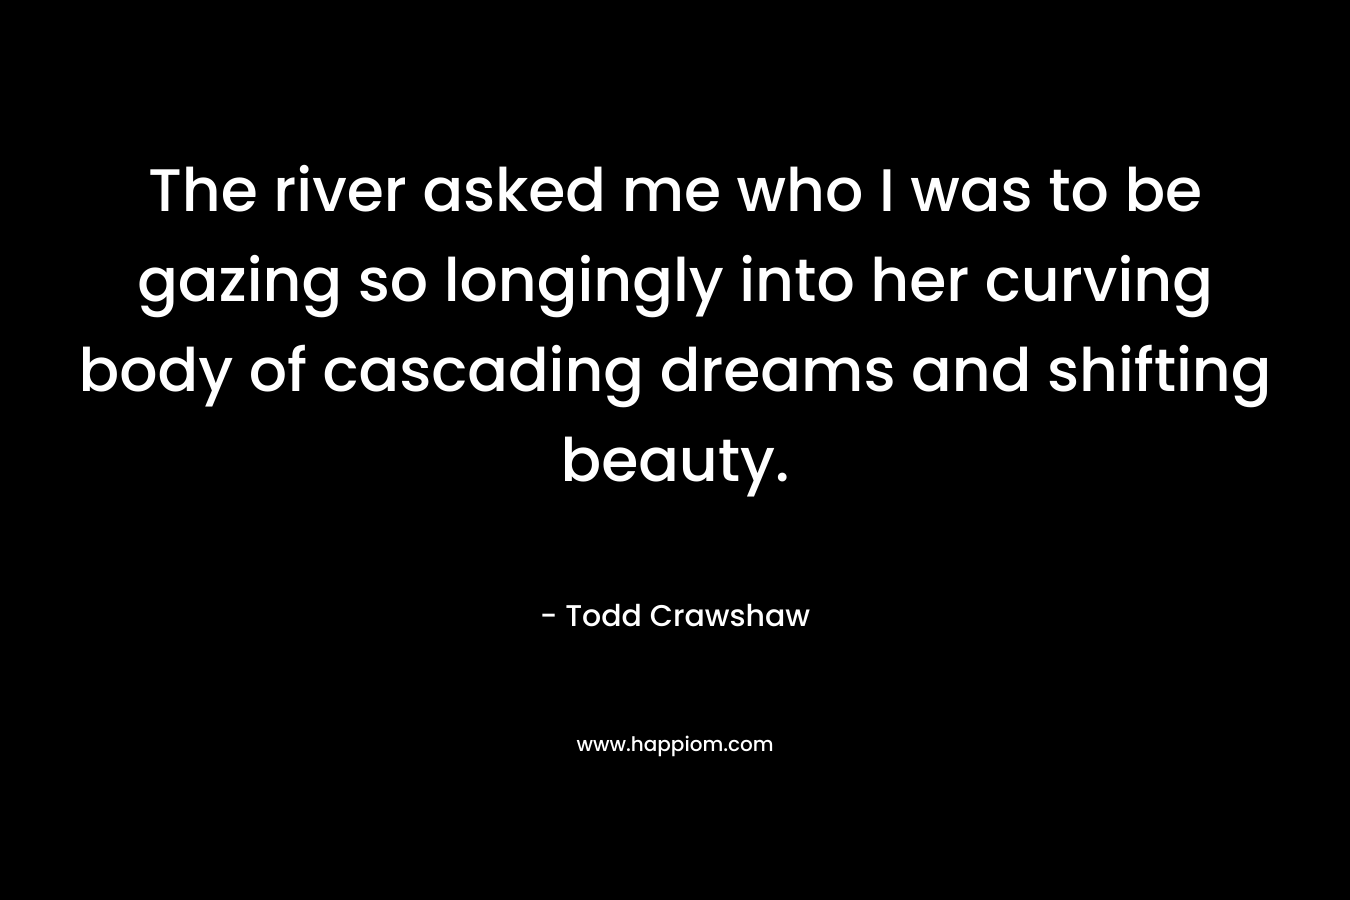 The river asked me who I was to be gazing so longingly into her curving body of cascading dreams and shifting beauty. – Todd Crawshaw